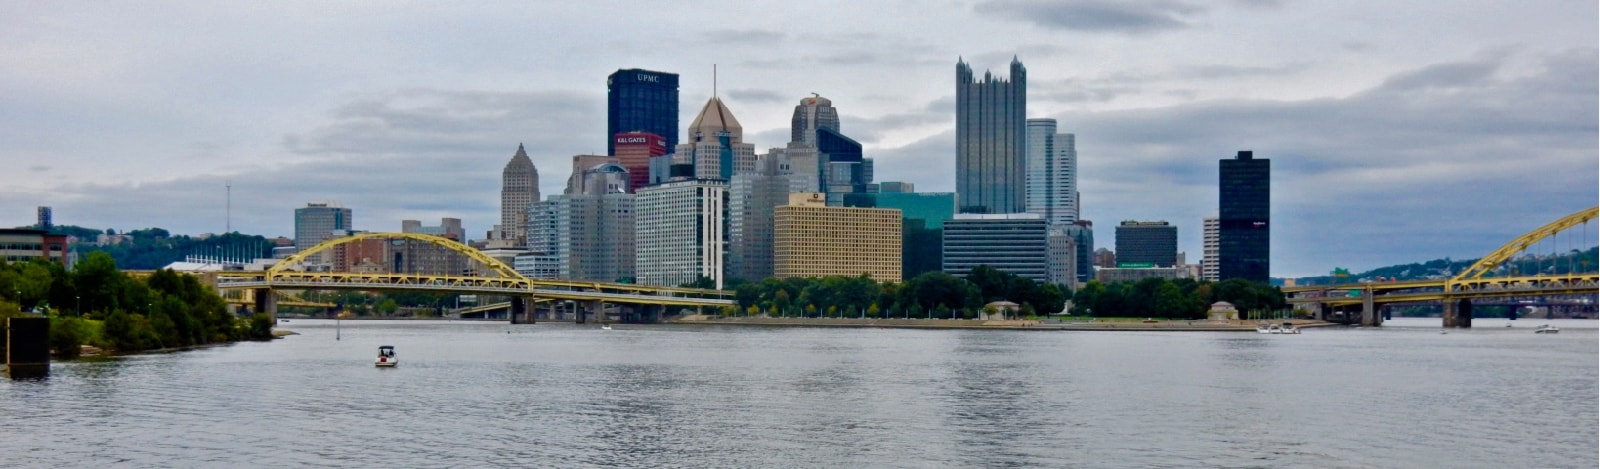 Downtown Pittsburgh from the River